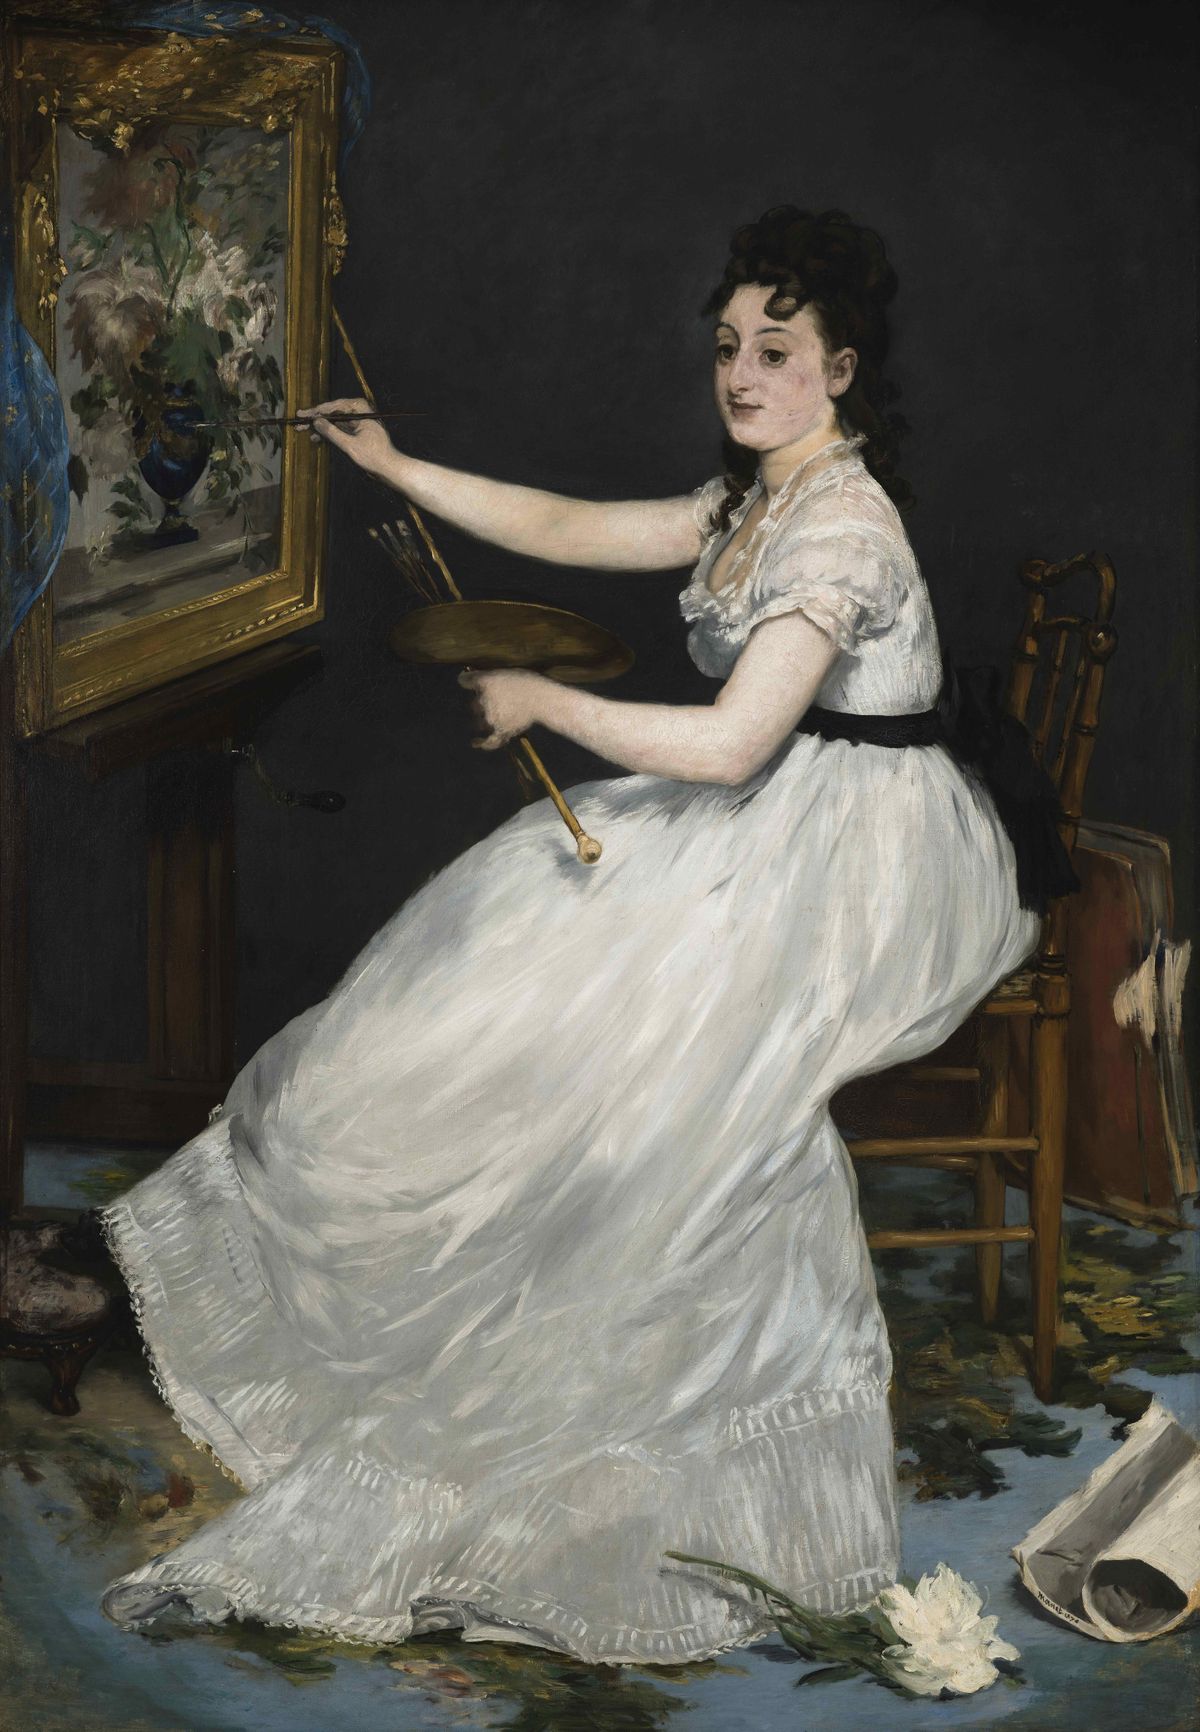 Art Series: Women Artists from the mid-19th century to contemporary art